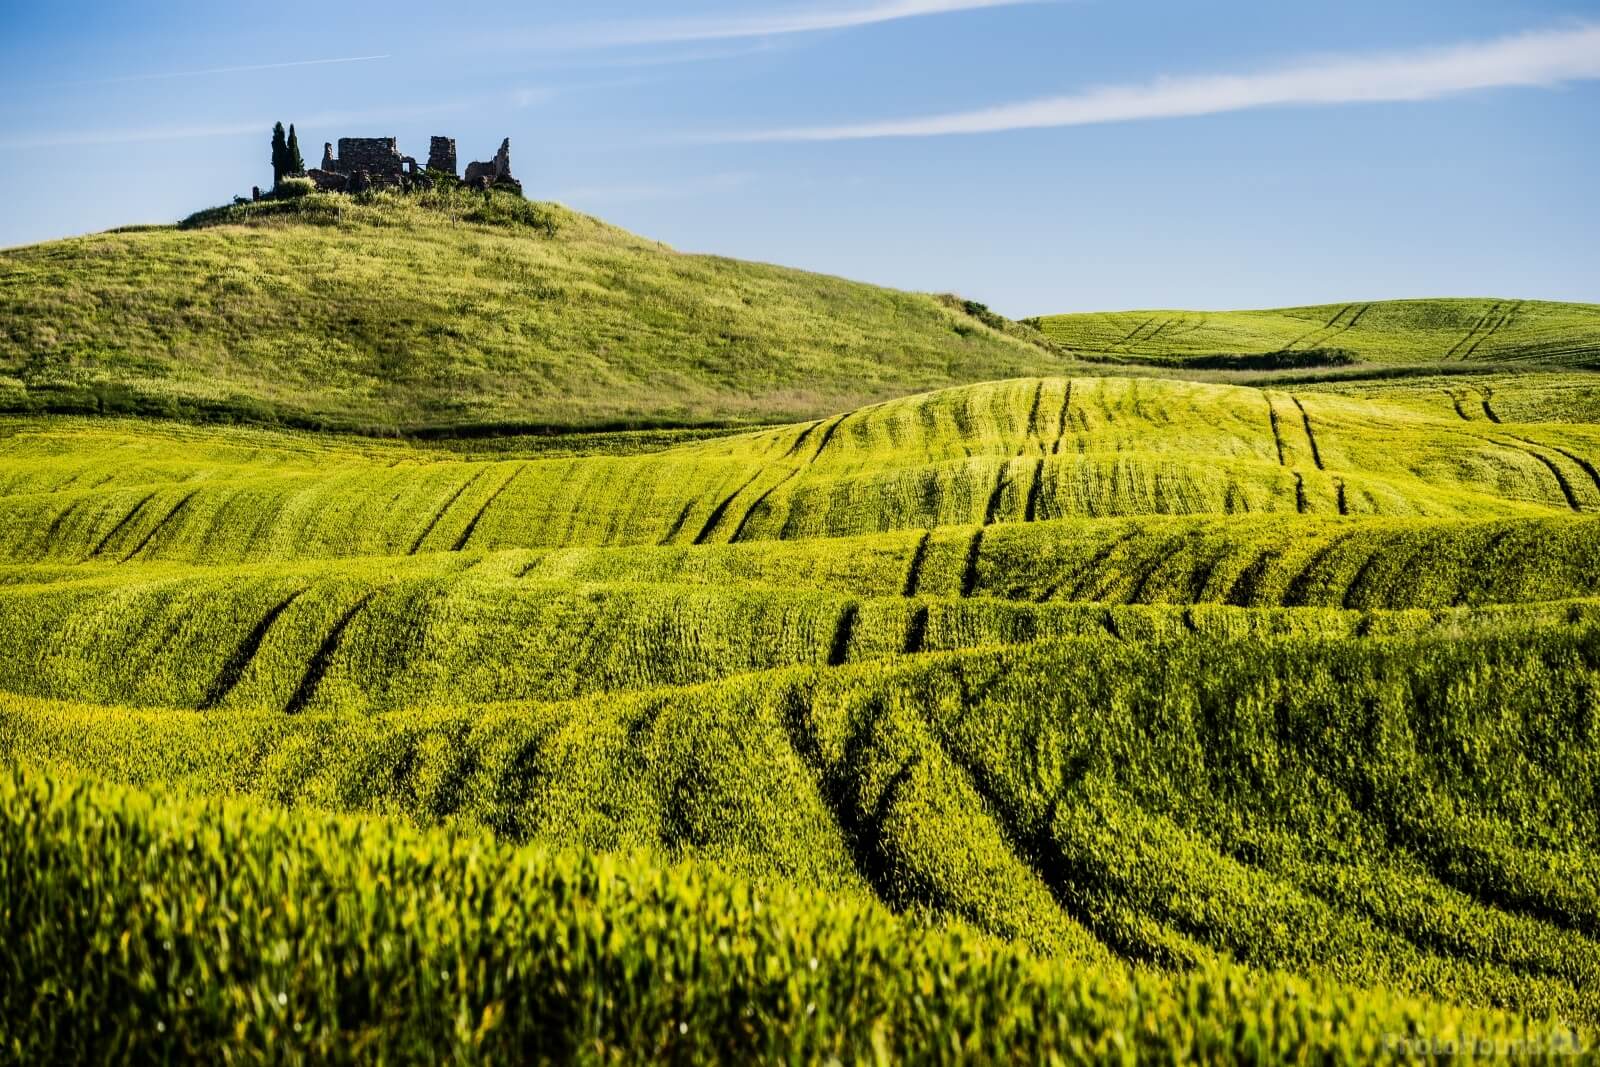 Image of Ruin in the fields of Tuscany by VOJTa Herout